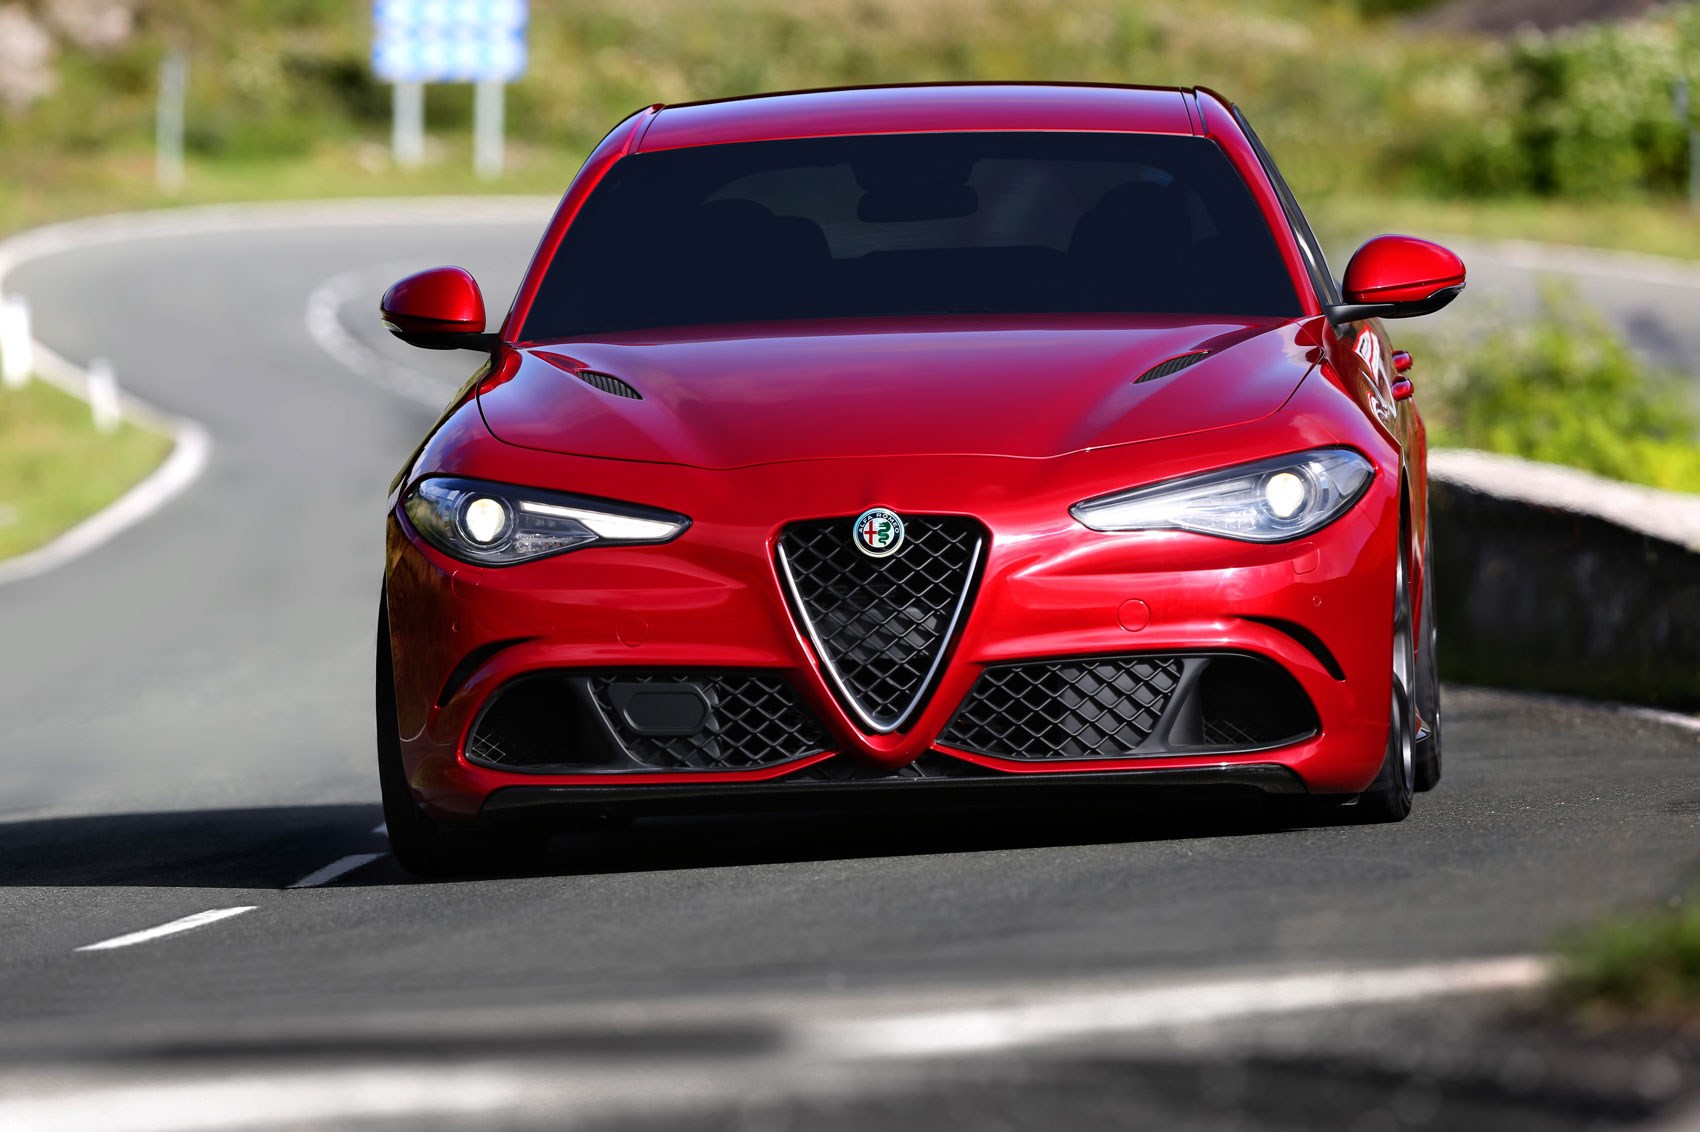 Alfa Romeo Giulia (2016) in pictures and on video: it's the new 159!